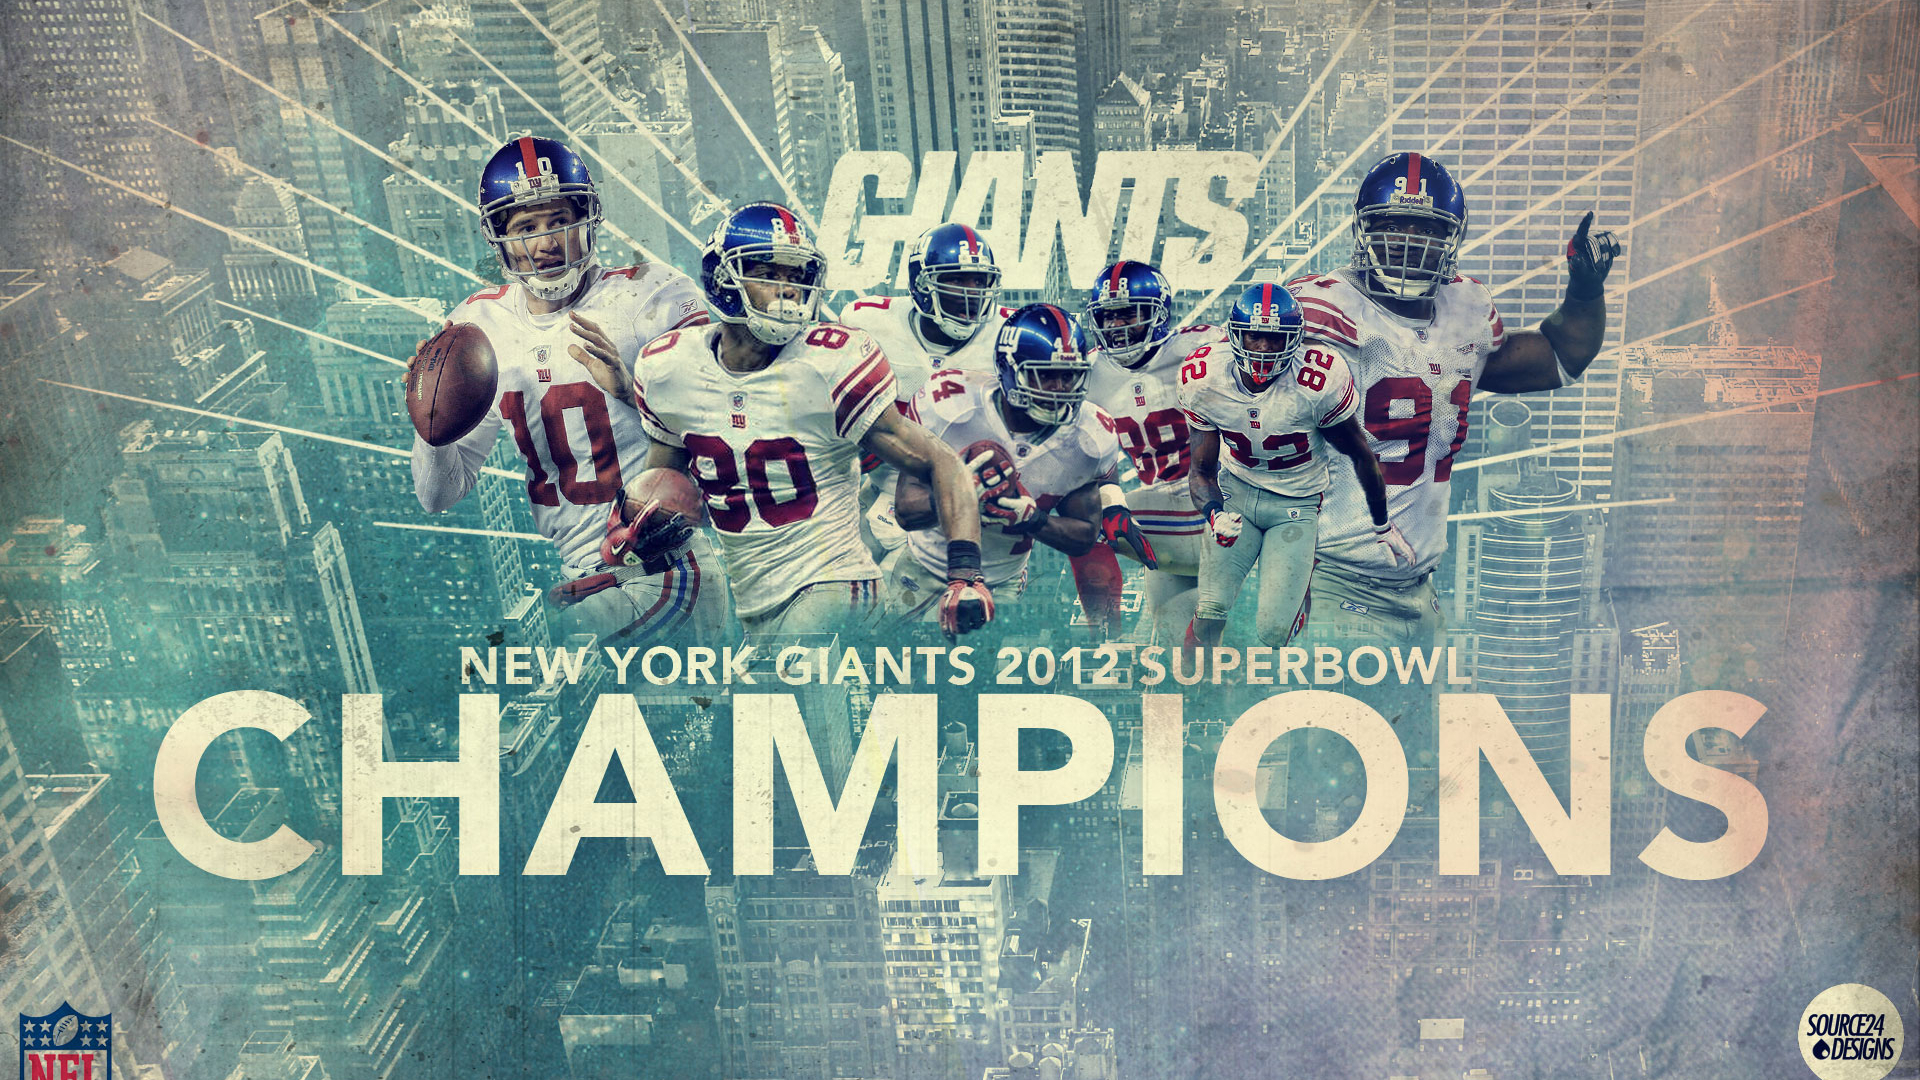 1920x1080 Free download New York Giants Wallpapers HD Download [1920x1200] for your Desktop, Mobile \u0026 Tablet | Explore 100+ NY Giants Wallpapers | NY Giants Wallpaper, NY Giants Wallpapers, NY Giants Wallpaper HD